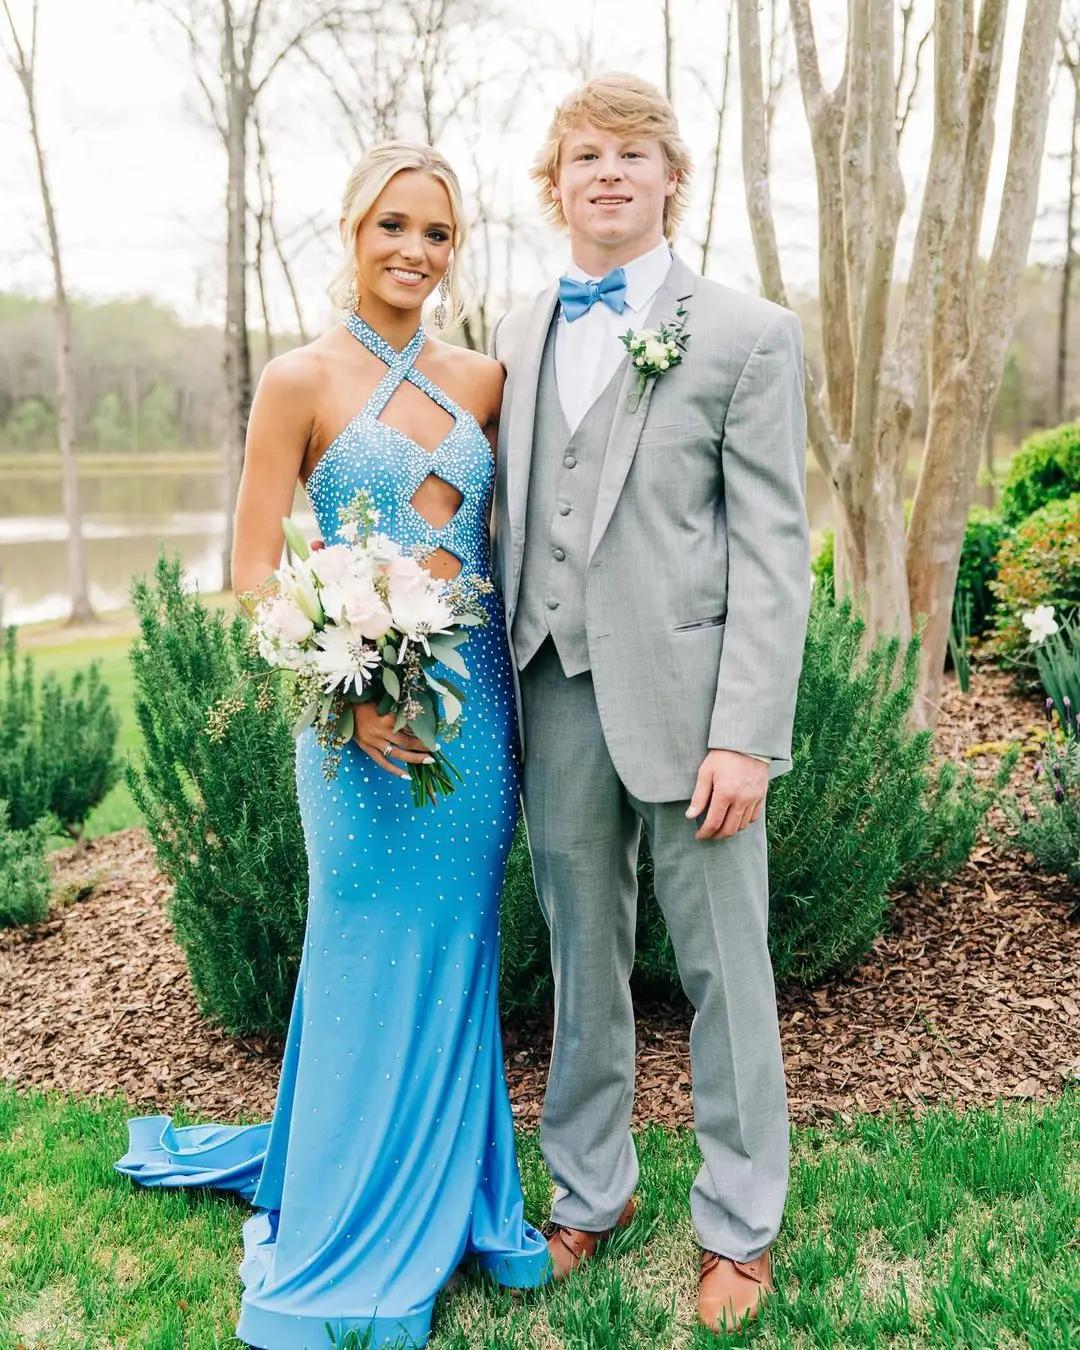 couple at prom girl in blue dress